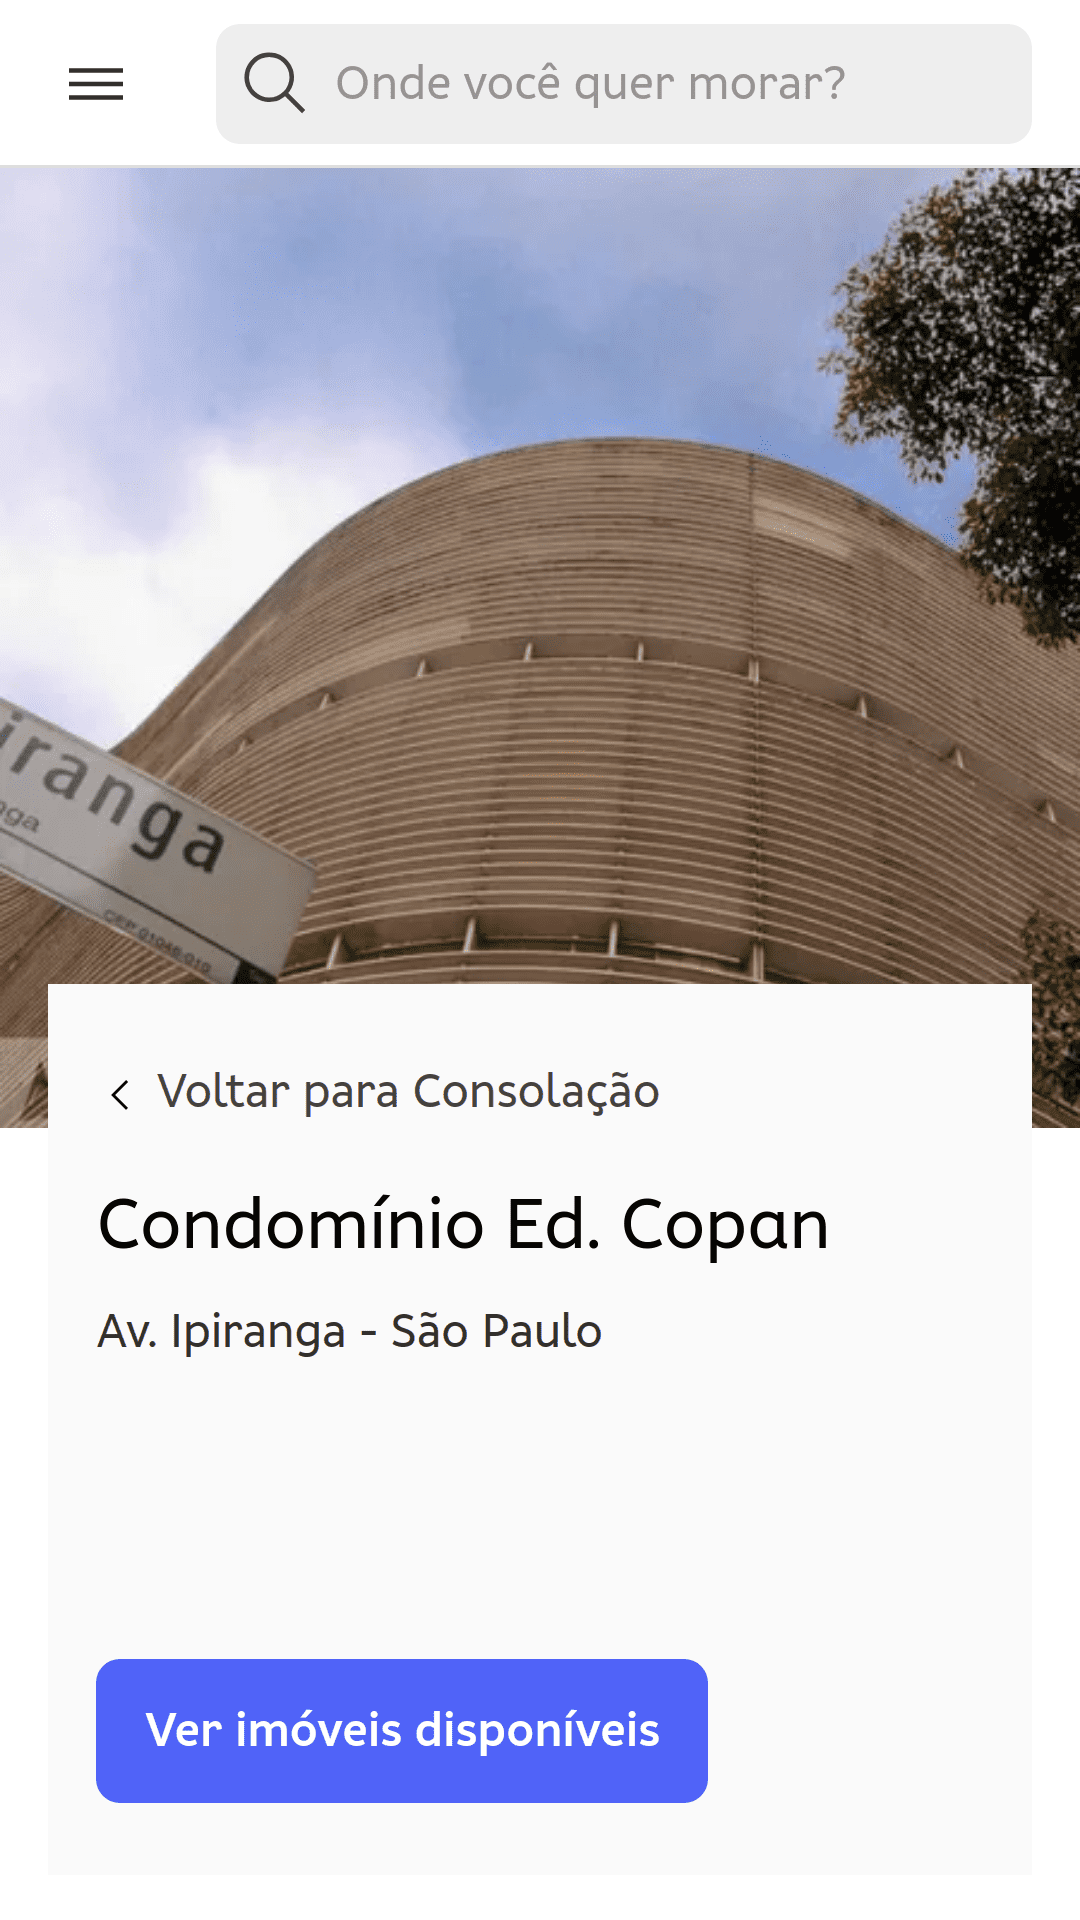 The condominium page for Edifício Copan (São Paulo, Brazil). A photo taken from the ground level shows the curves of the building structure.